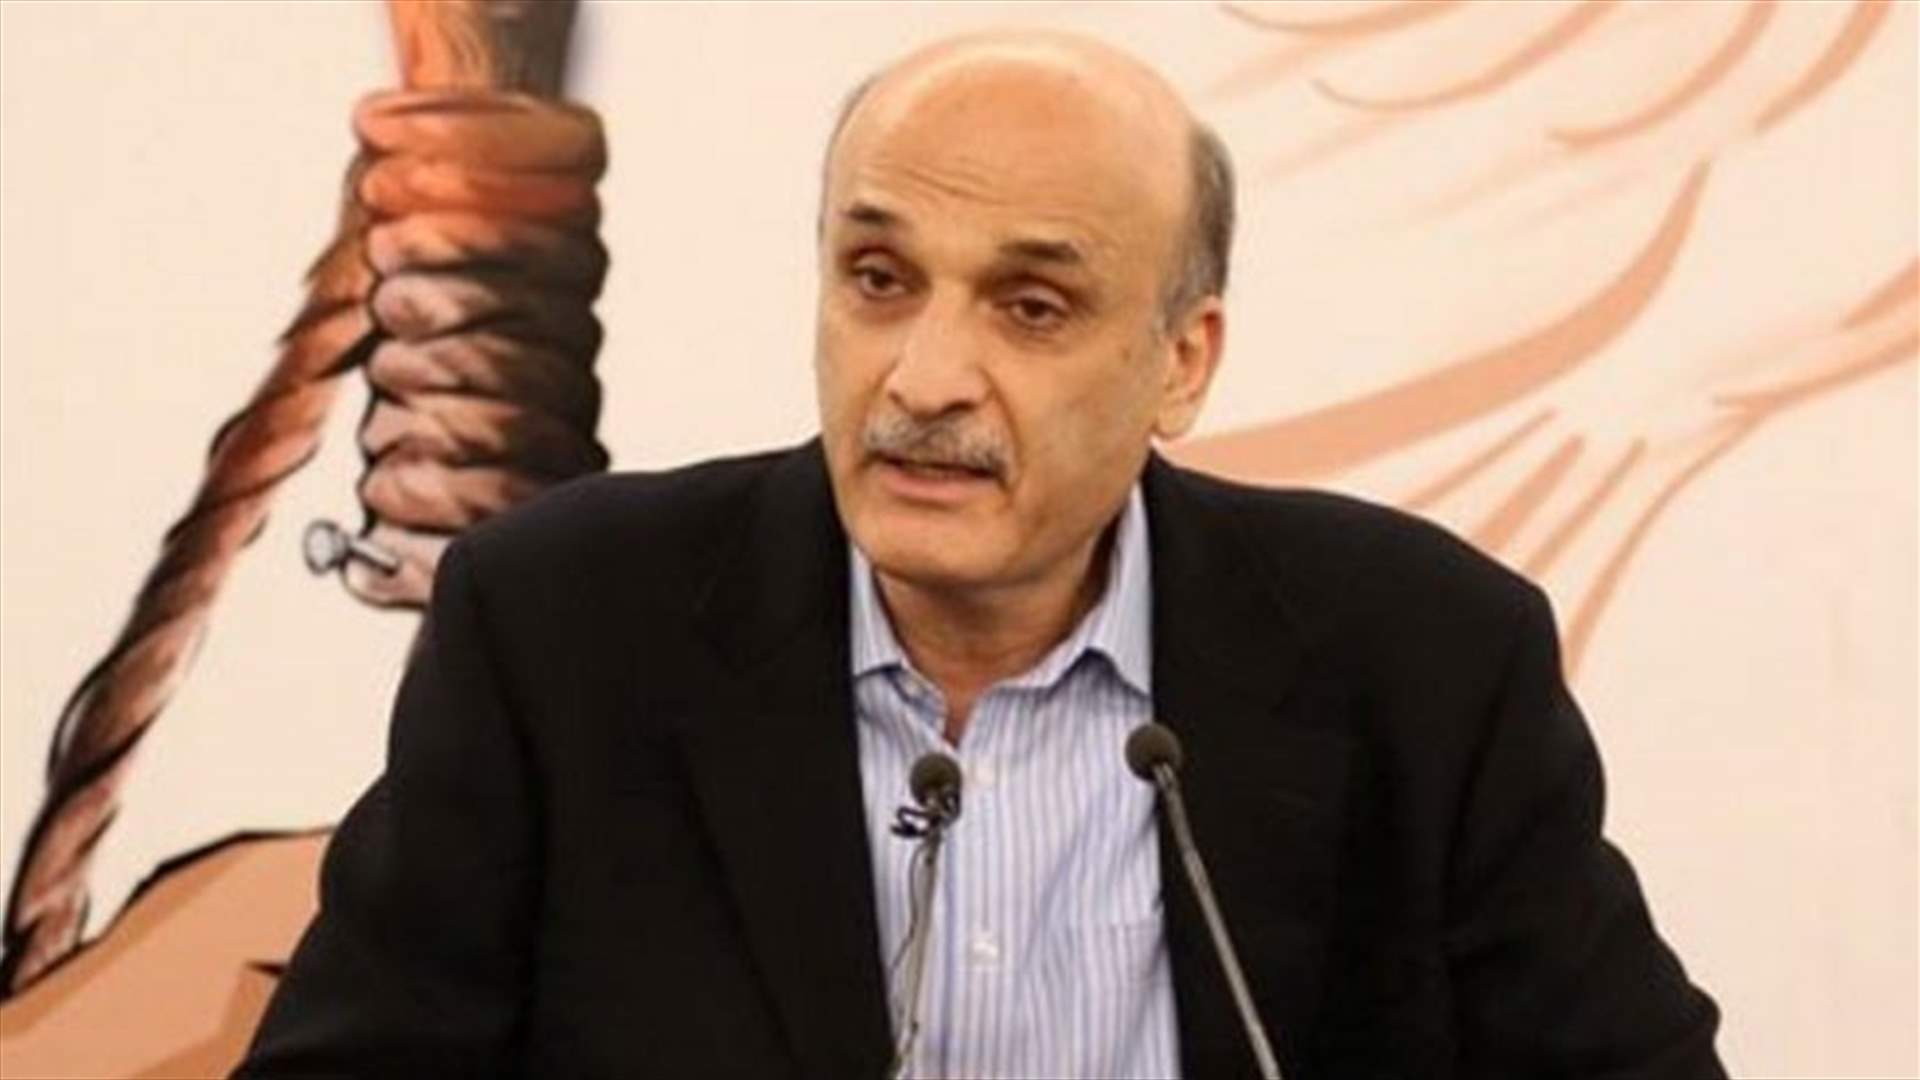 Geagea: Some sides are trying to exclude LF from new government 